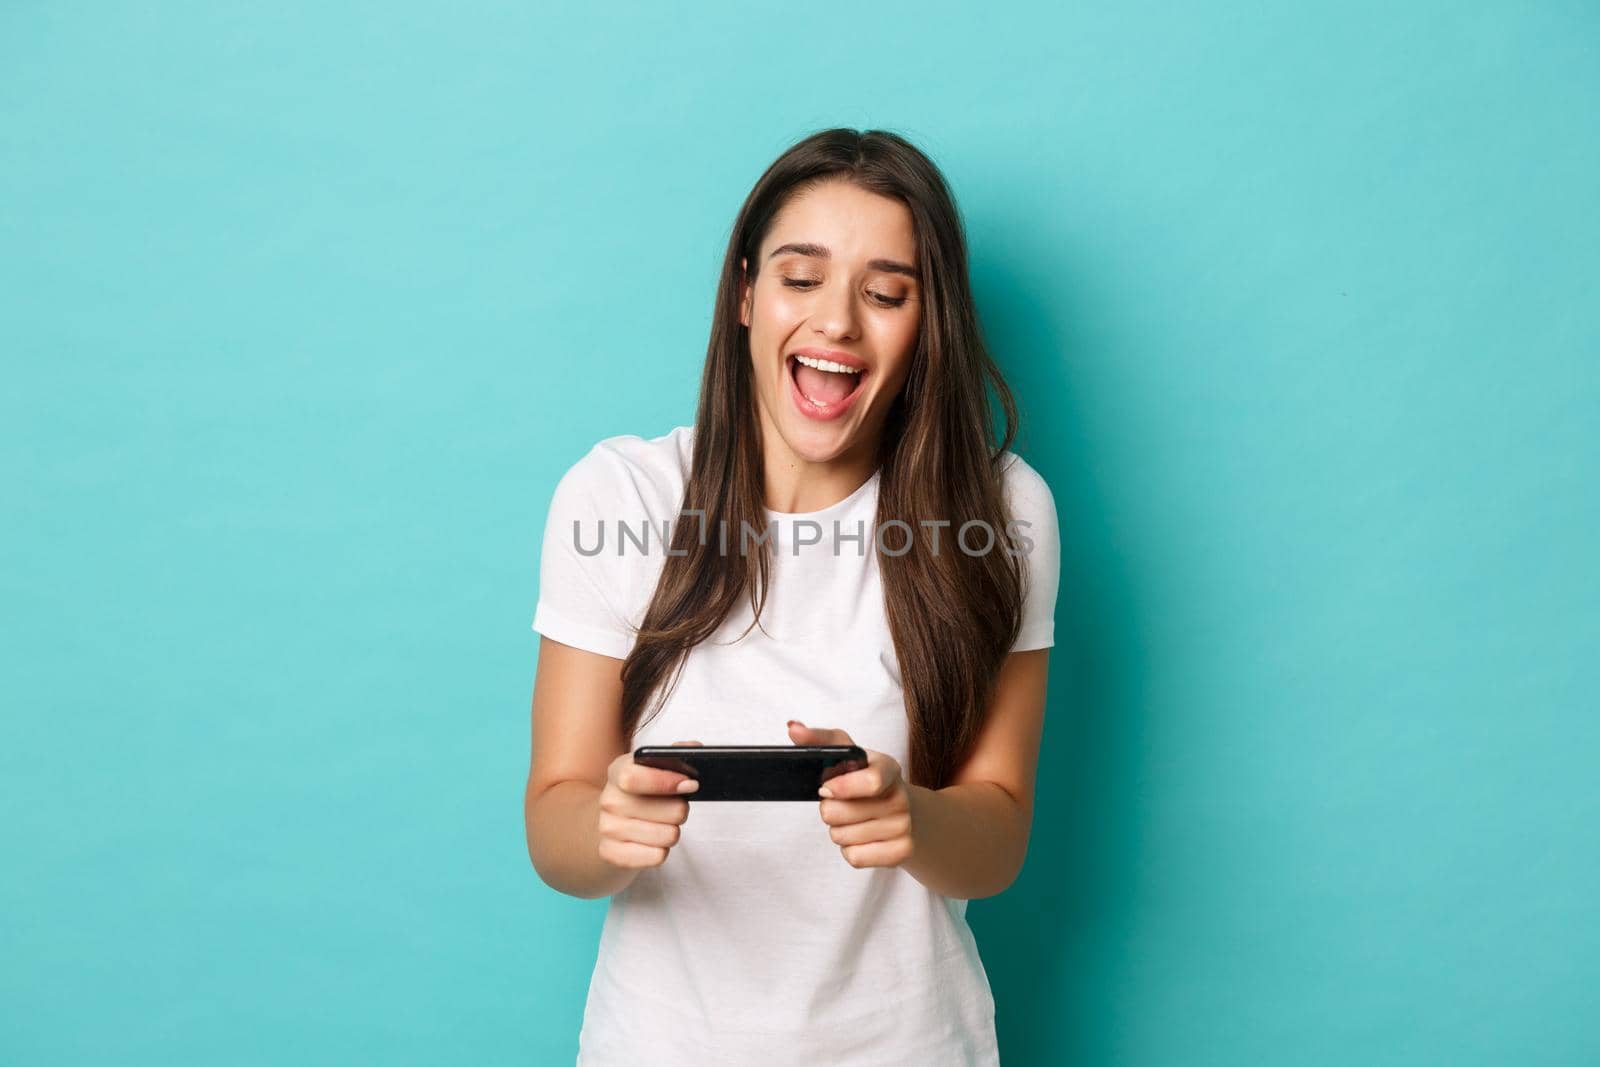 Image of happy young woman in white t-shirt, playing mobile phone game and smiling, standing over blue background.